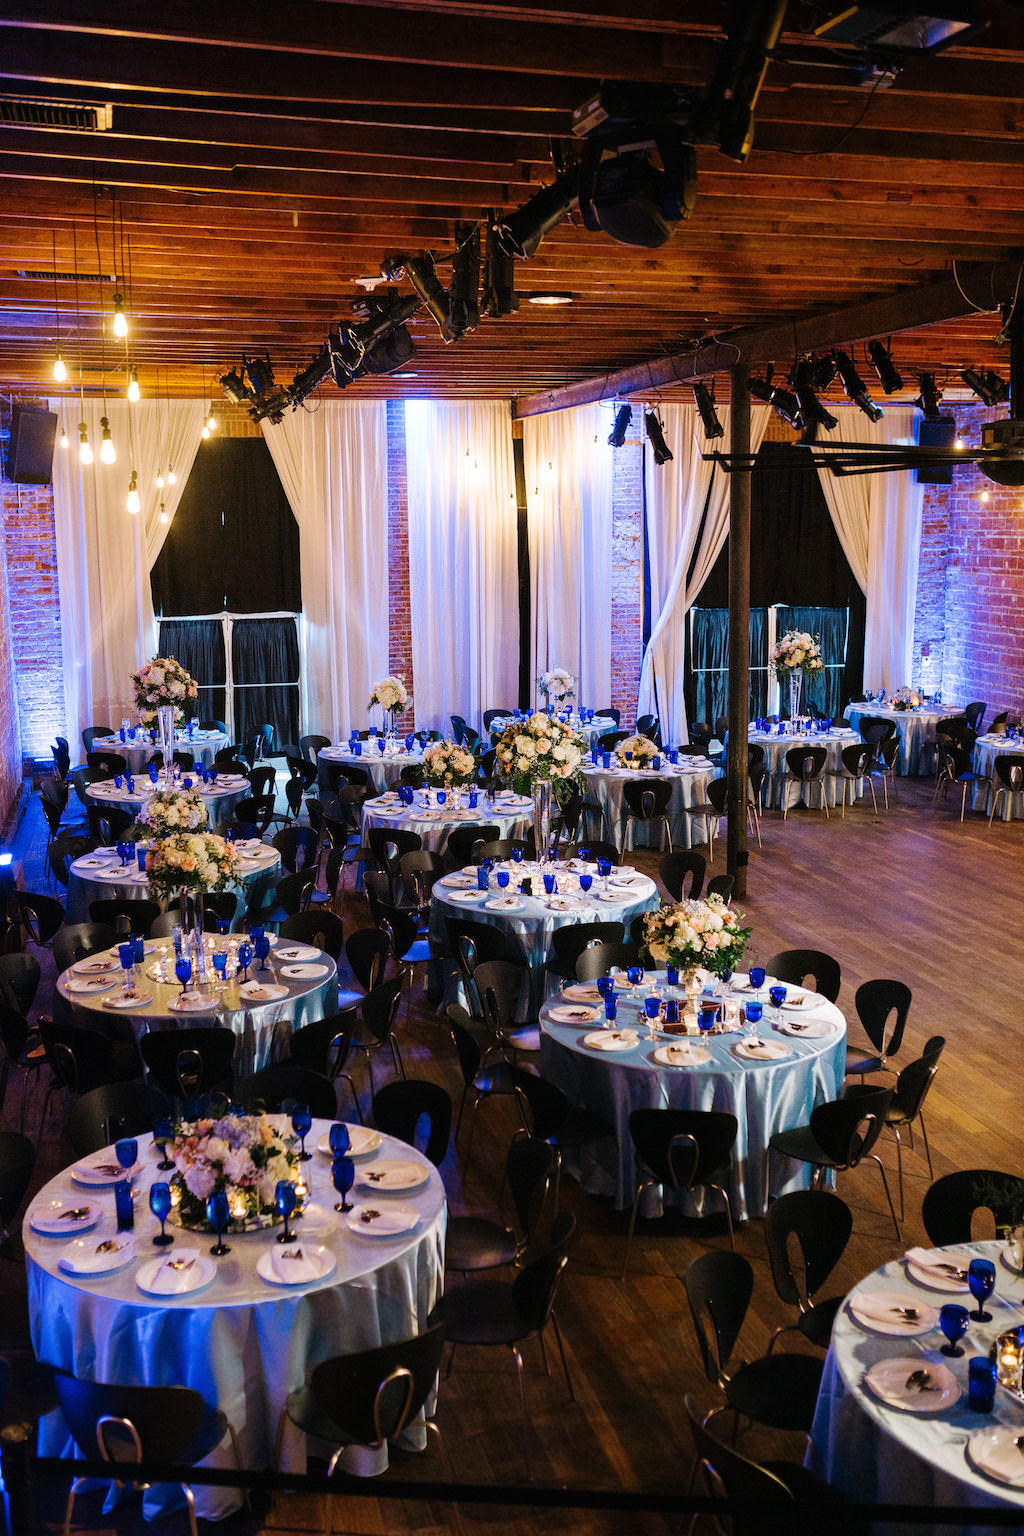 Modern, Romantic Reception and Florida Wedding Decor, Tall Floral Centerpieces with White, Peach, Pink, Ivory Flowers, Round Tables with Silver Tablecloths, Blue Stemware, Exposed Brick Wall | Tampa Bay Premier Wedding Venue NOVA 535 in Downtown St. Pete